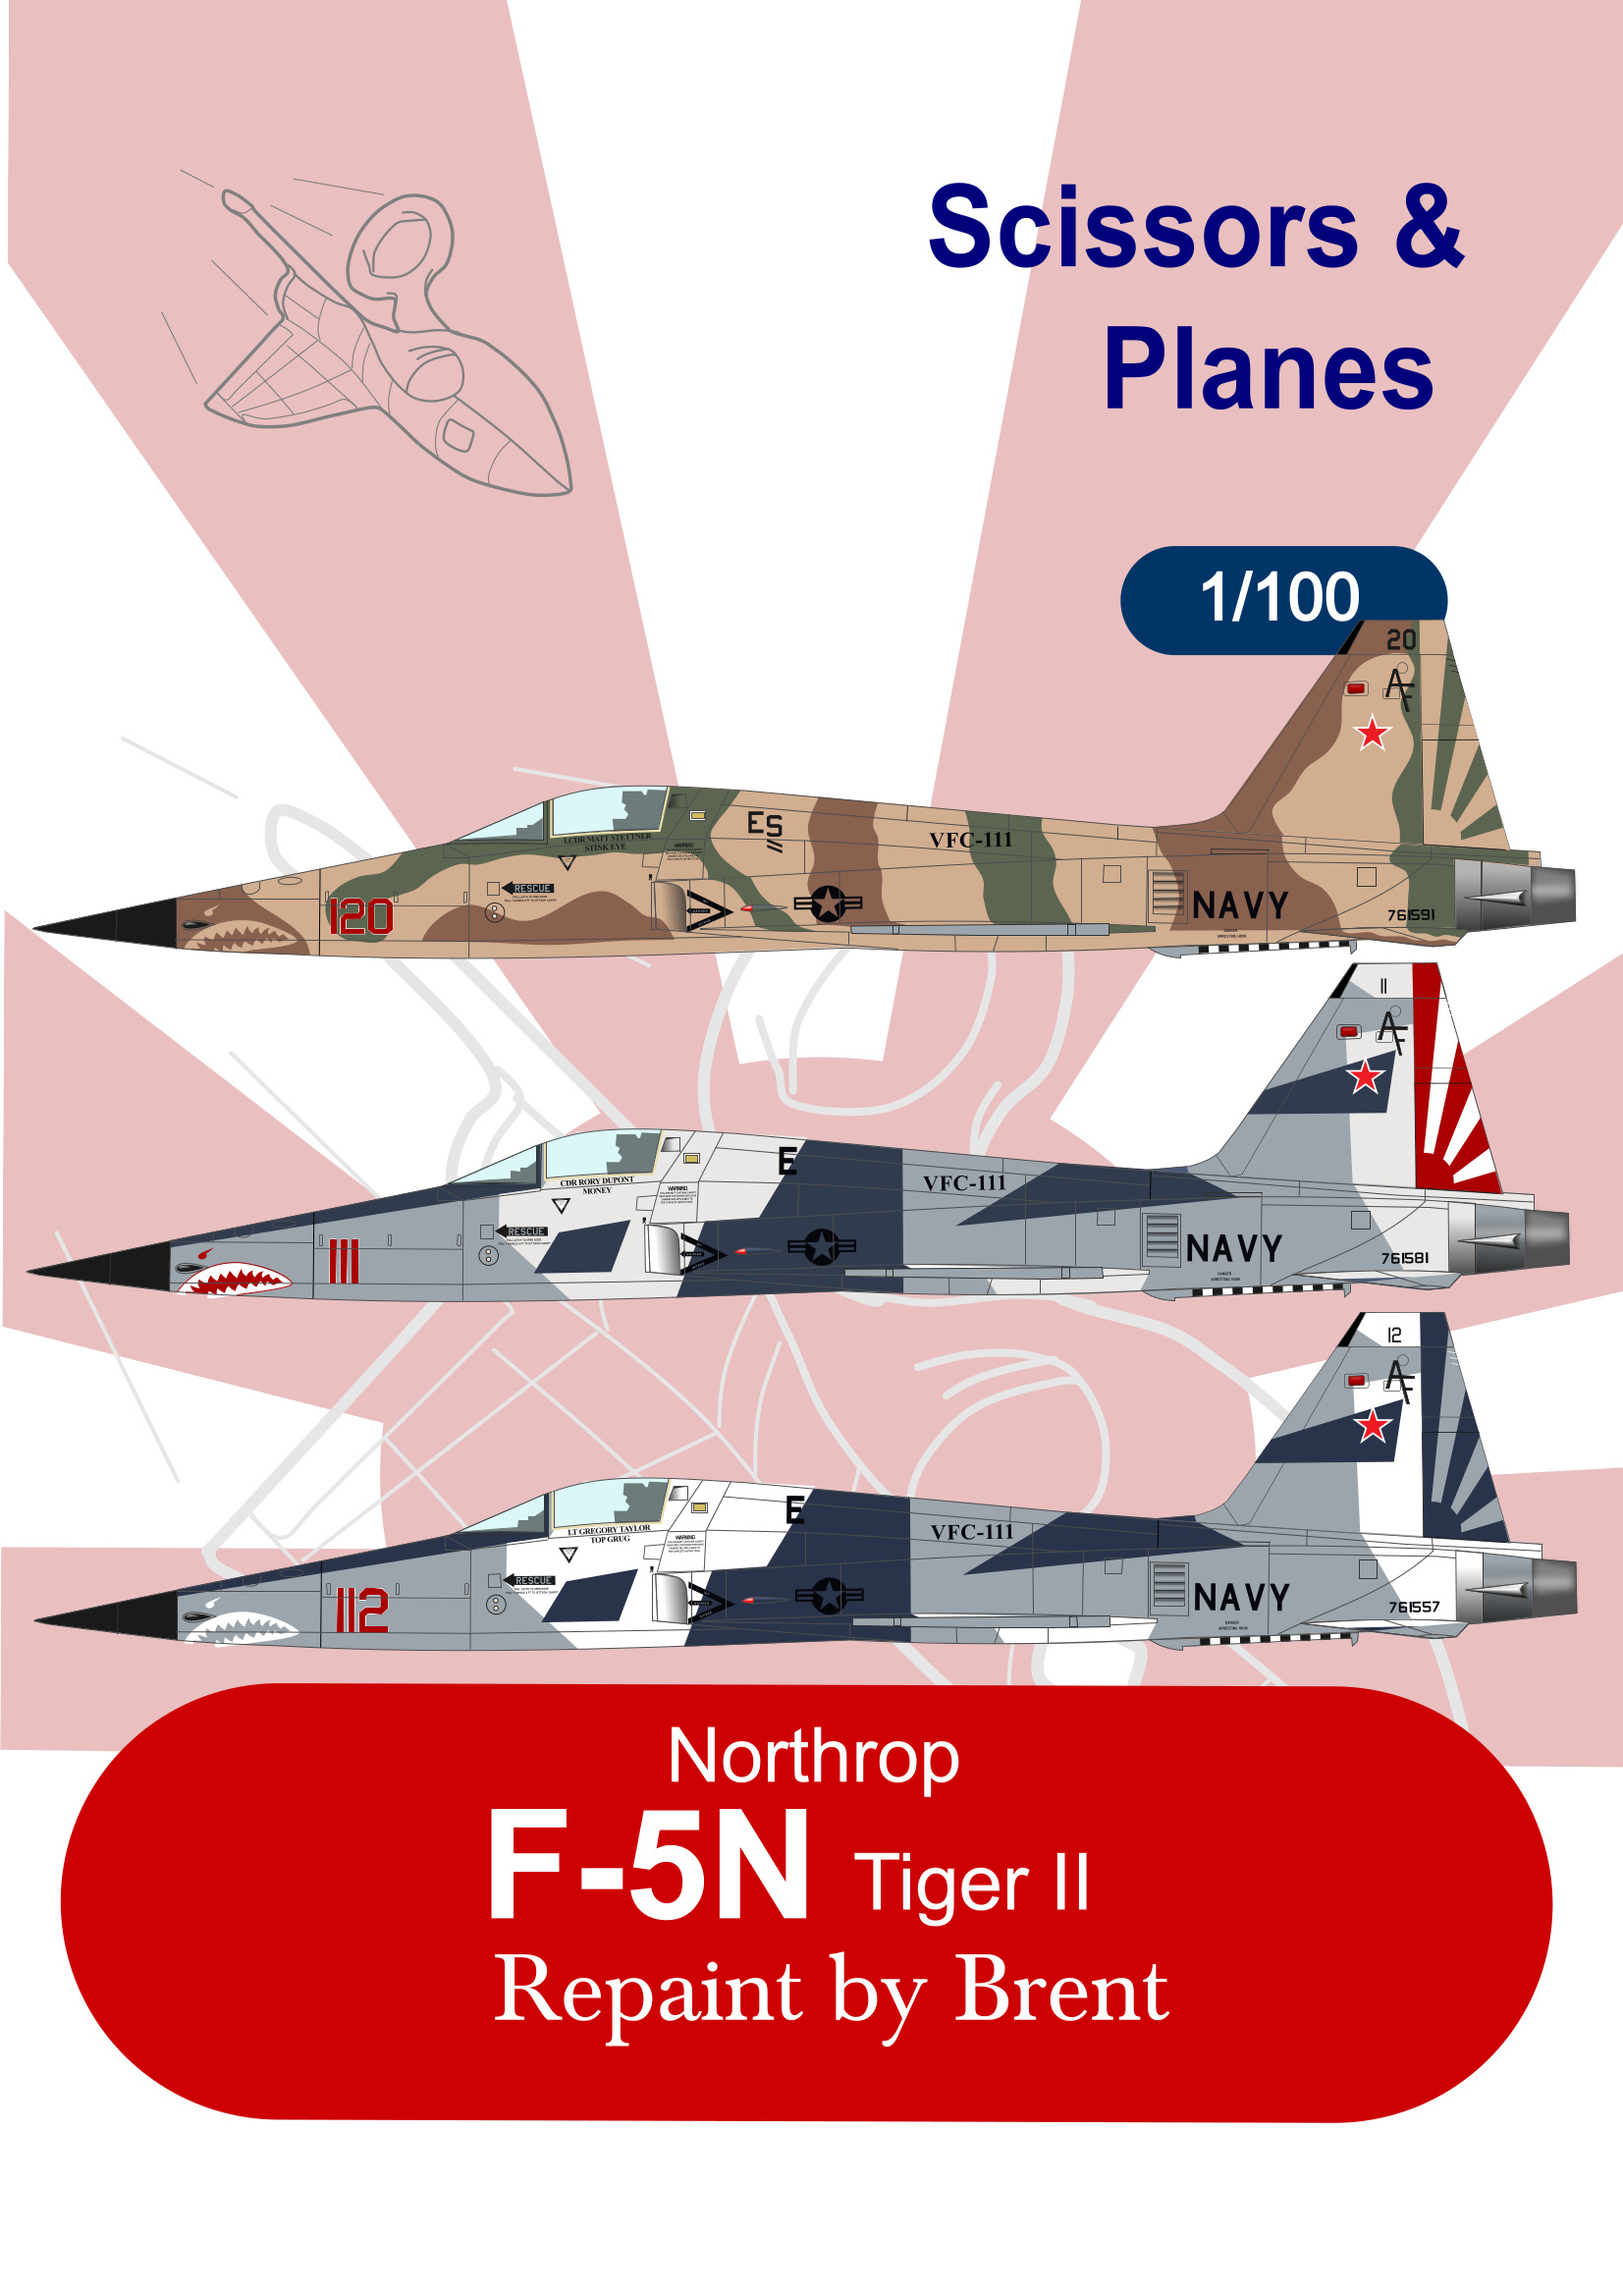 Scissors and Planes Archives - Page 2 of 35 - EcardModels